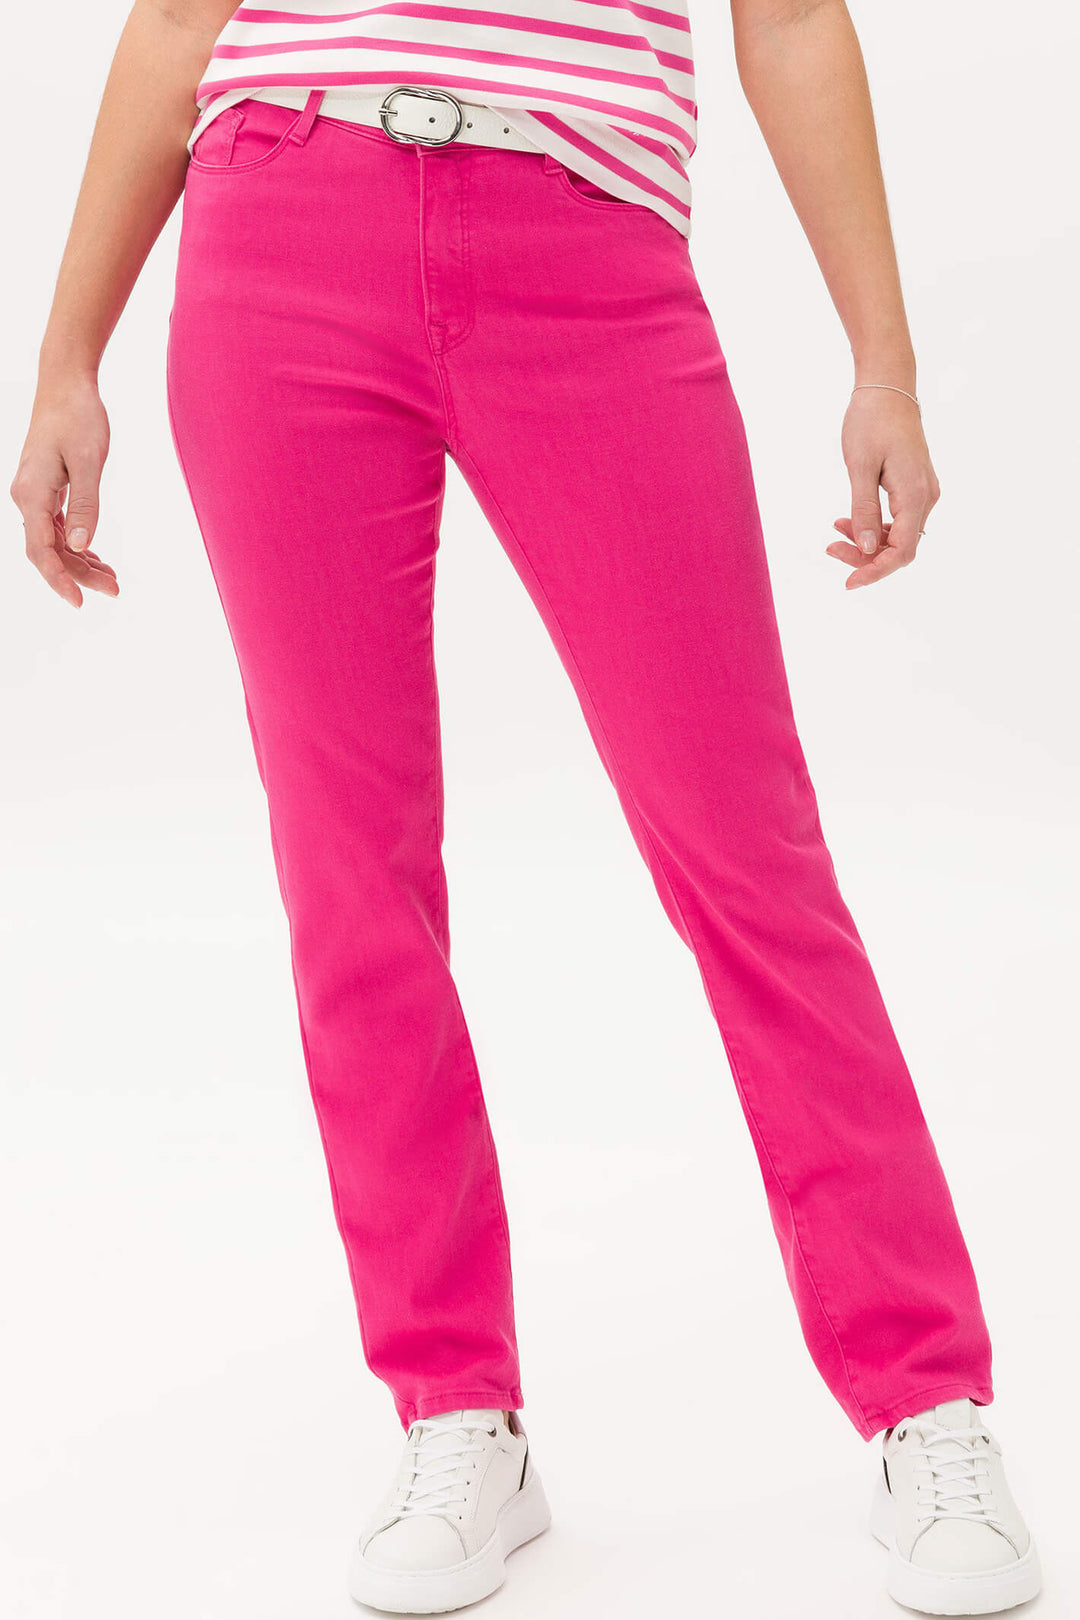 Brax 72-4058 85 Mary Flush Pink Slim Fit Straight Cut Five Pocket Jeans - Shirley Allum Boutique